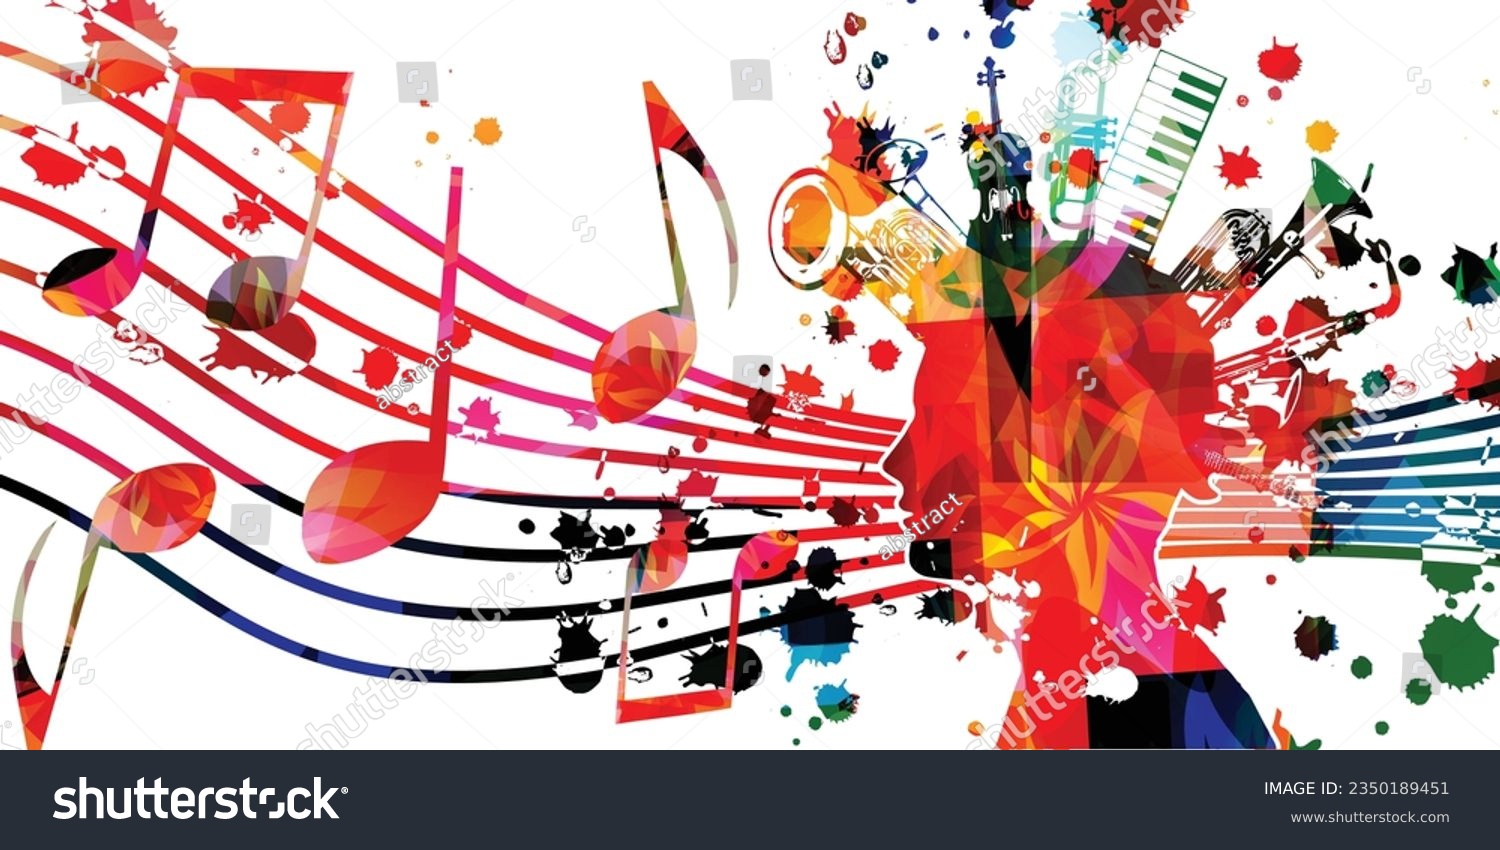 SVG of Colorful musical background with male head and musical instruments bundle with musical notes staff. Vector illustration. Design for composing, creativity and talent, listening and creating music svg